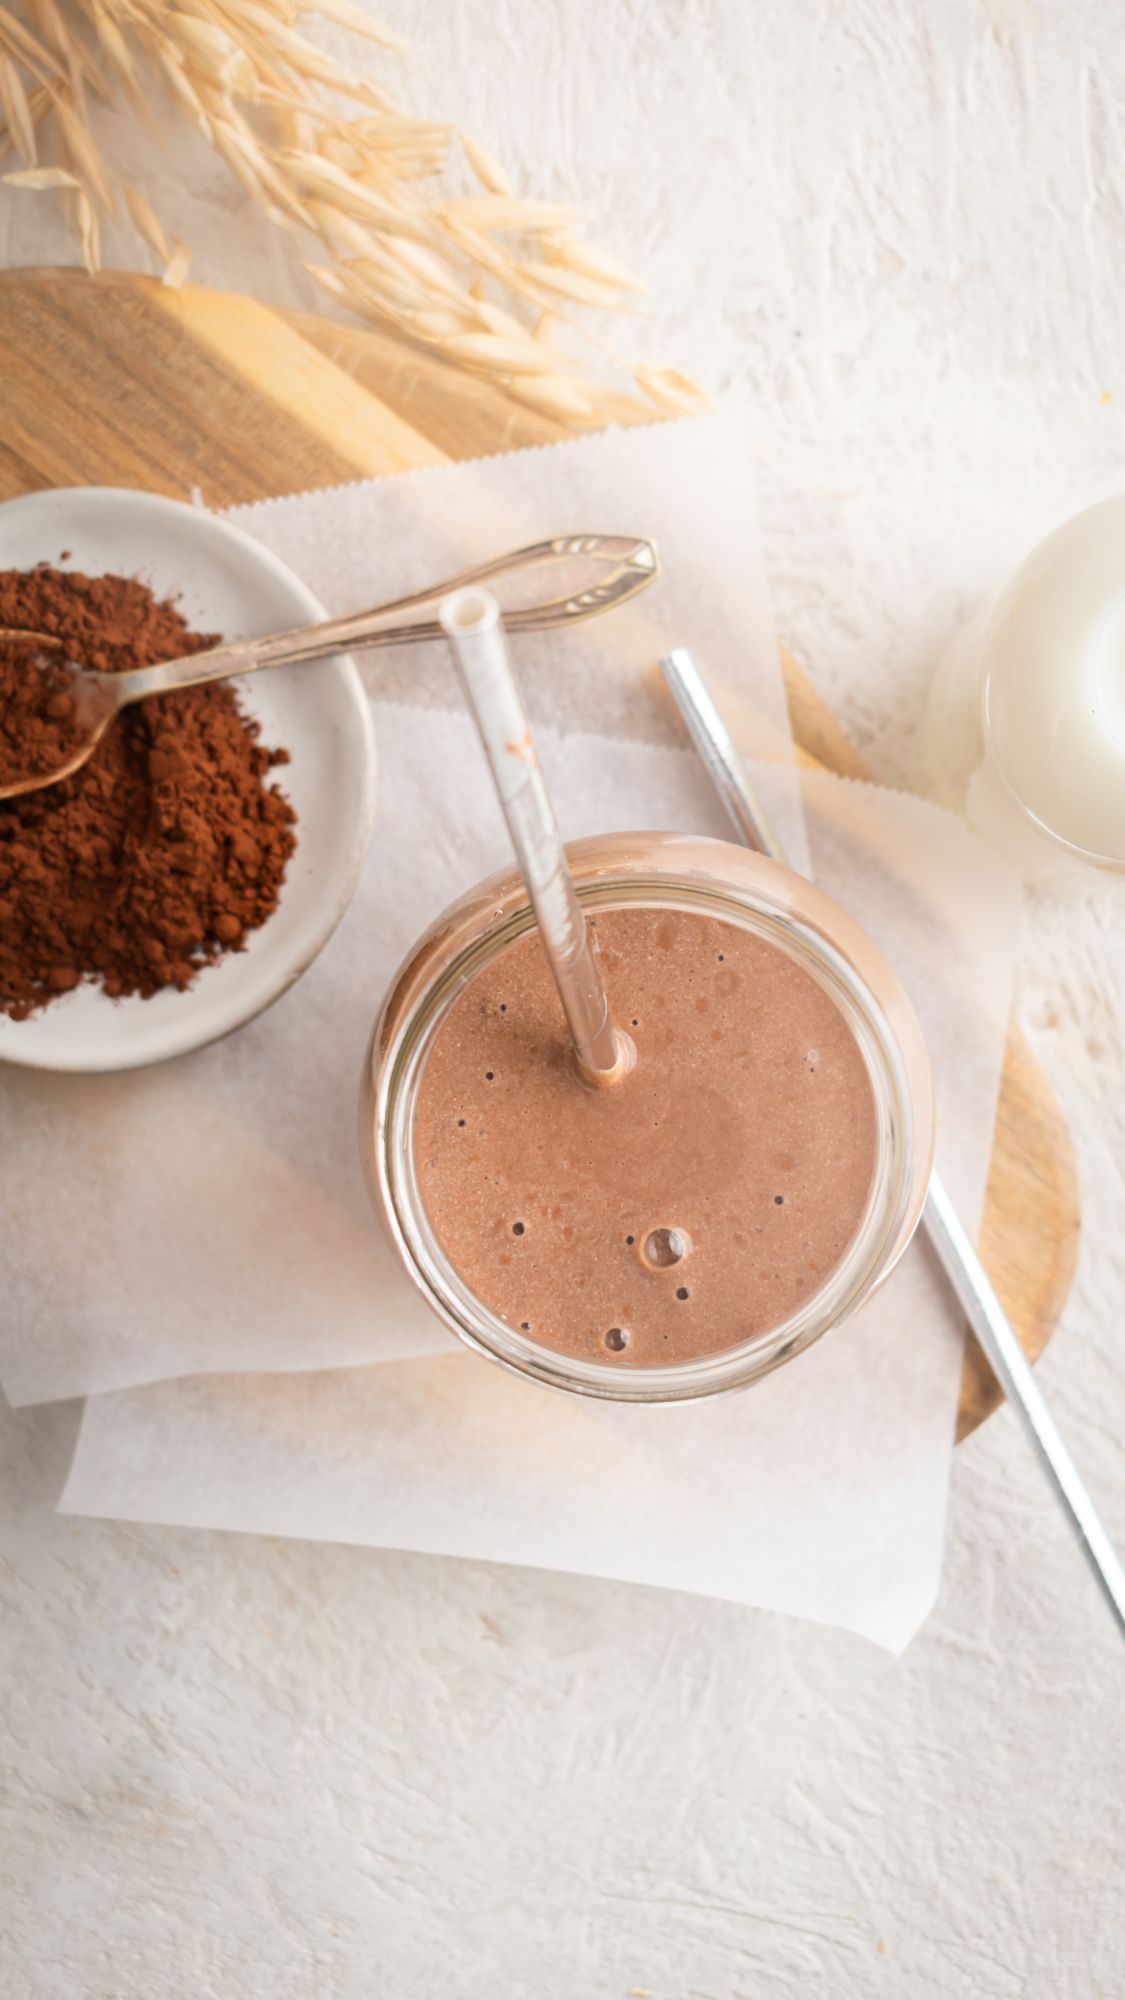 Chocolate protein shake served in a glass with a metal straw and cocoa powder on the side.